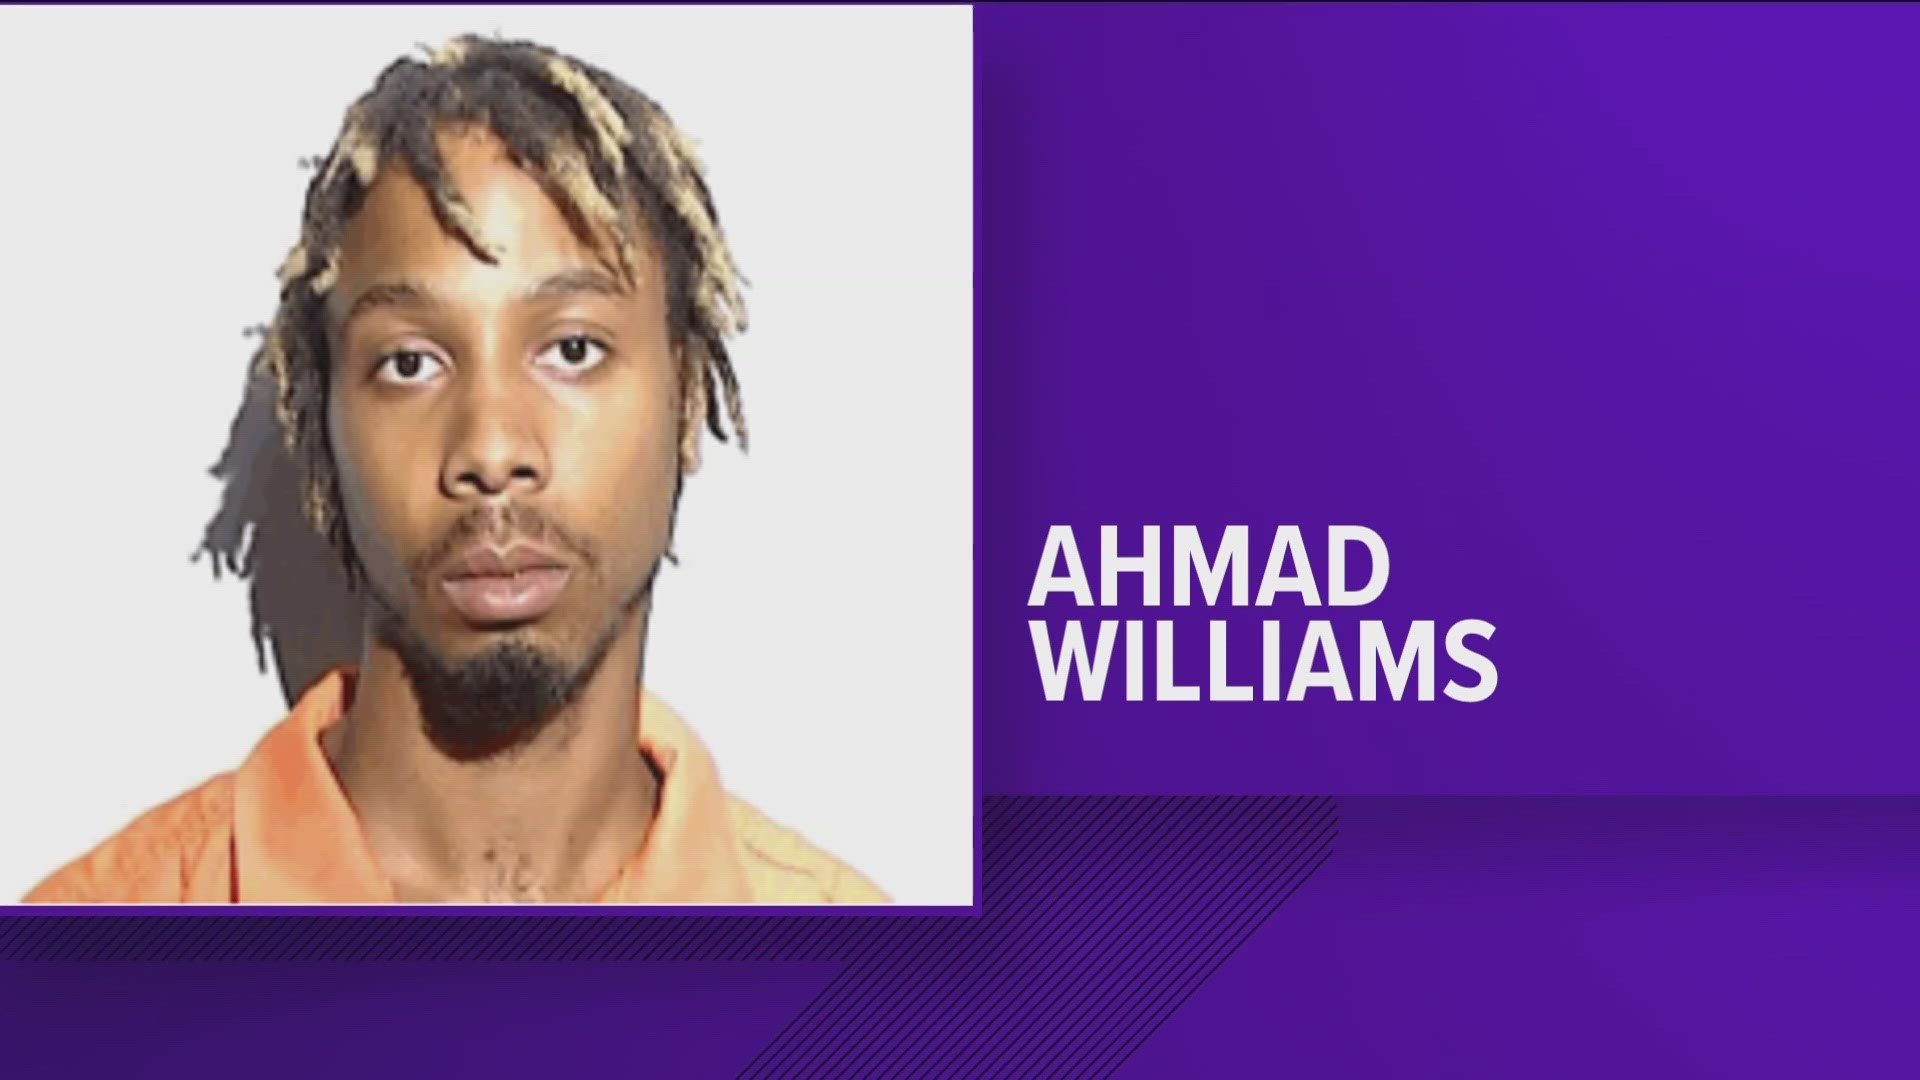 Ahmad Williams, now 23, admitted to causing serious head injuries to his child in August 2022. The infant had a fractured skull and later died from their injuries.